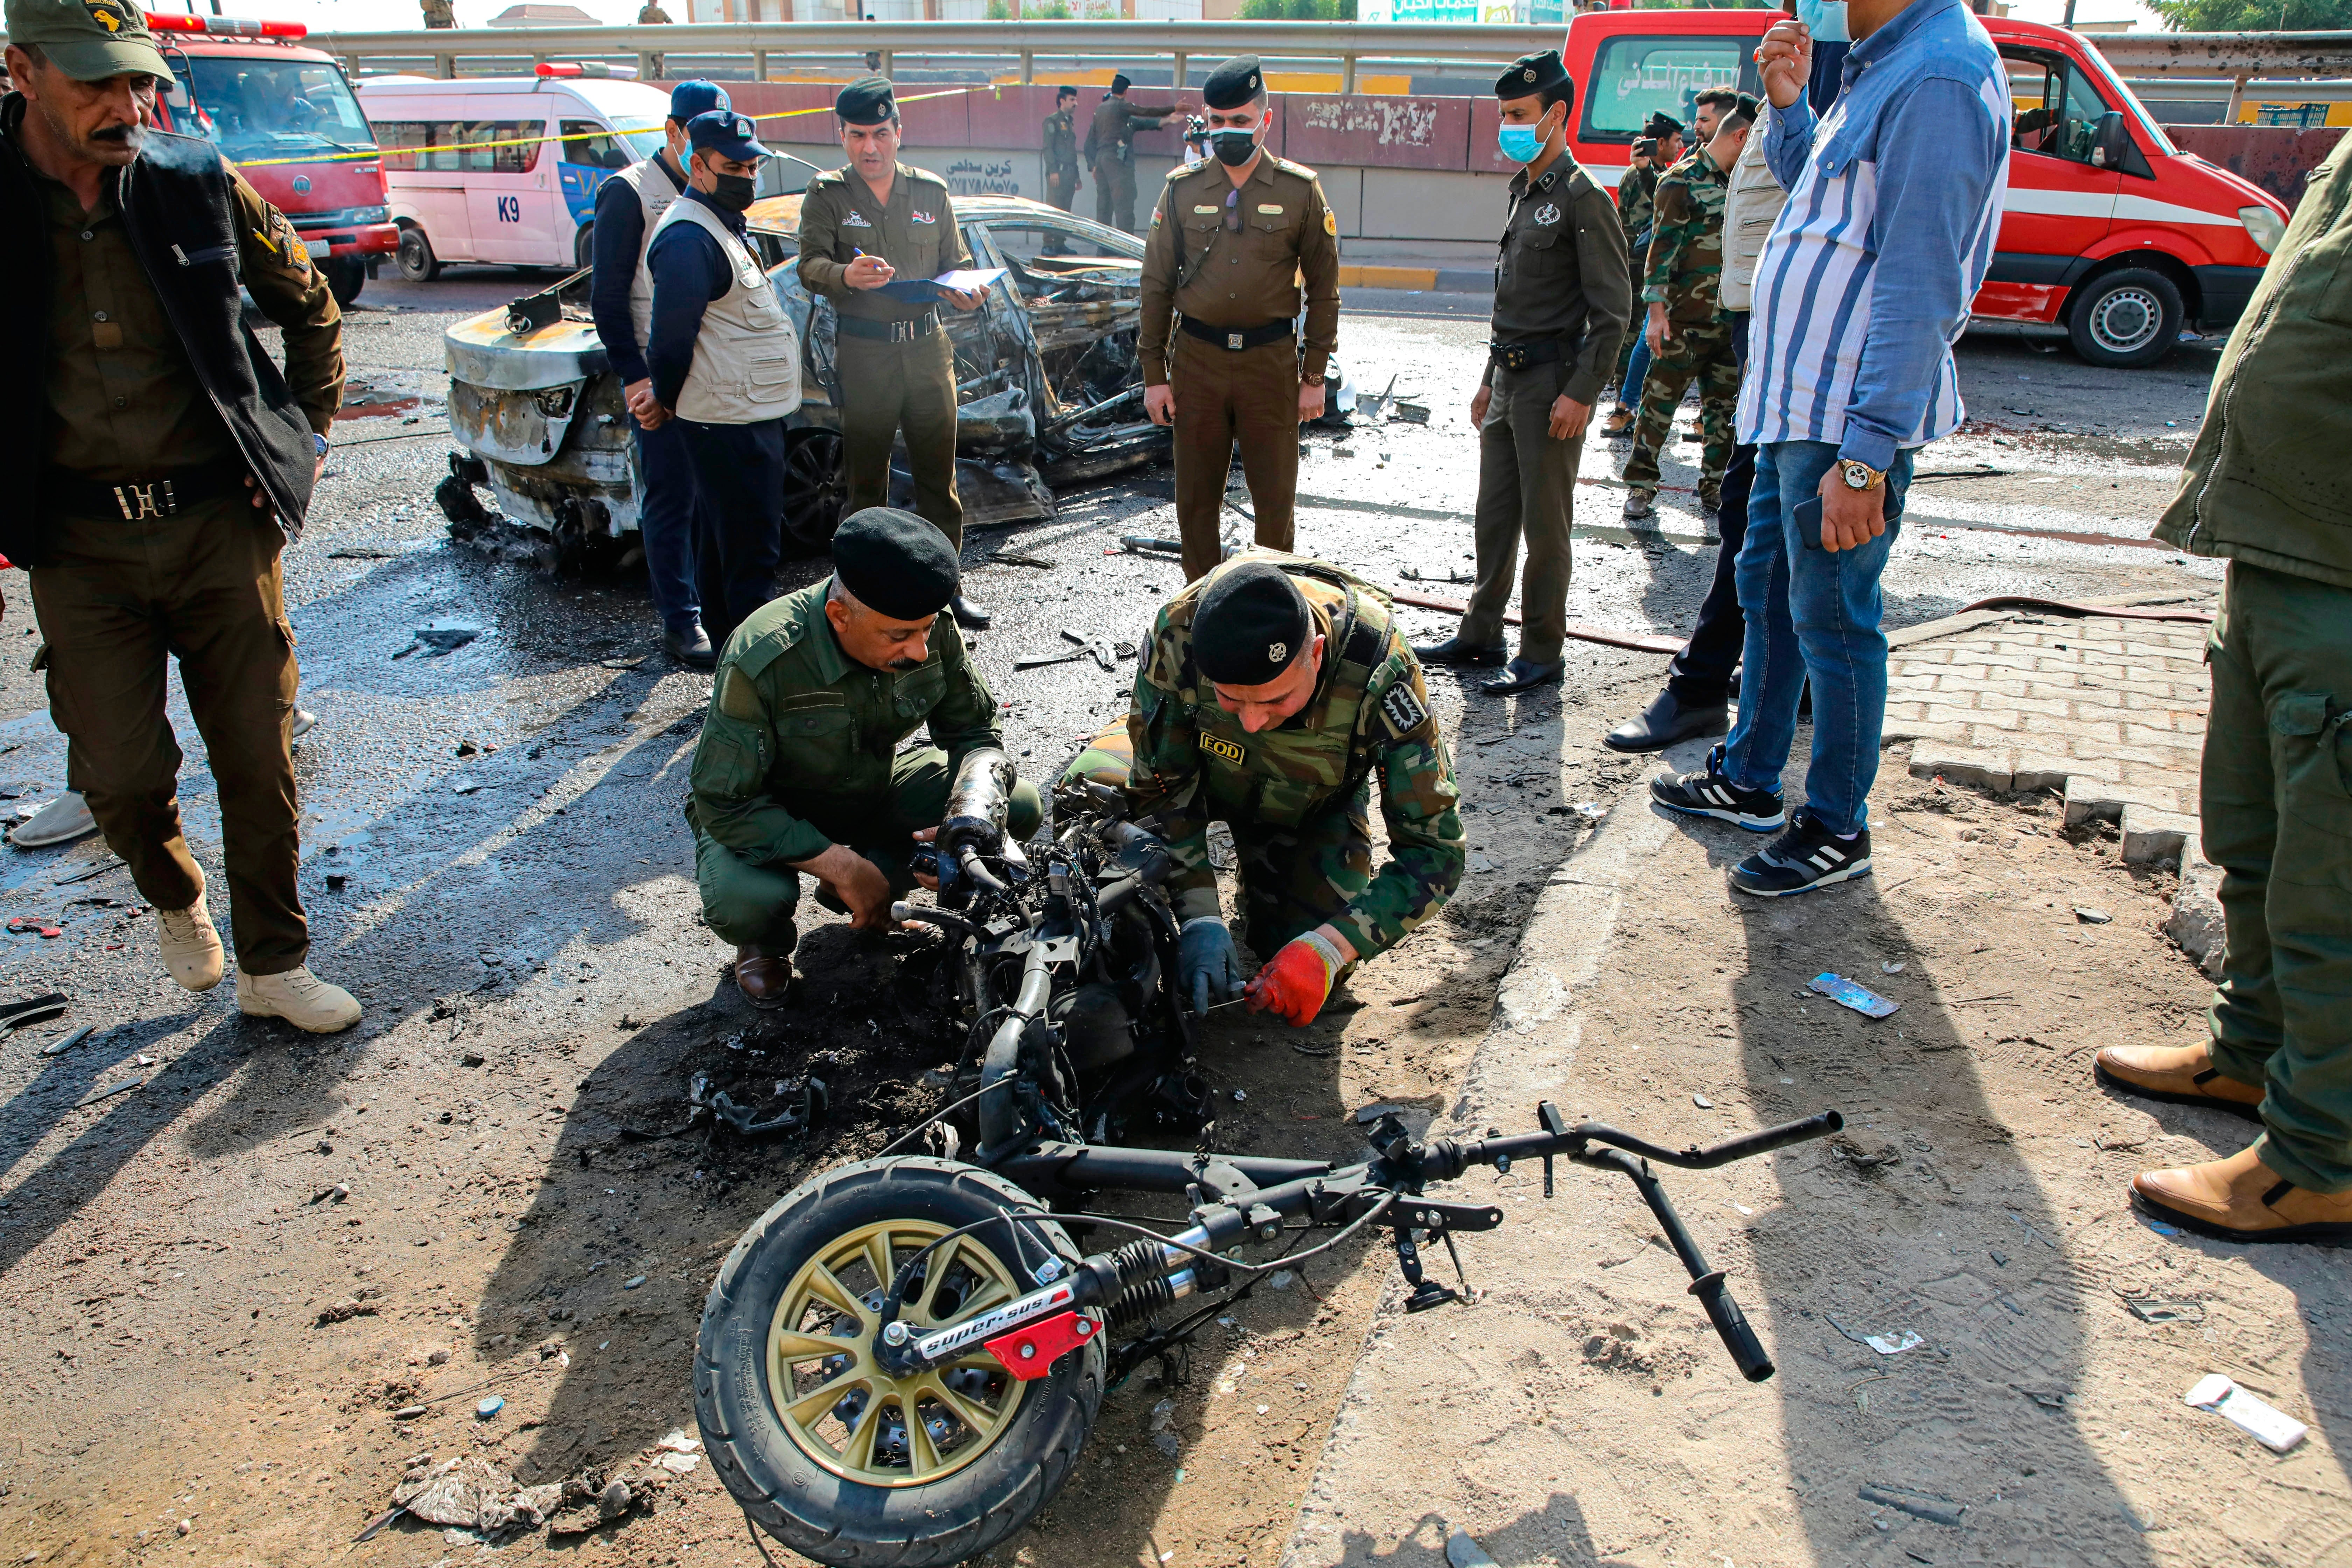 Security forces inspect a motorcycle at the site of an explosion in Basra, Iraq